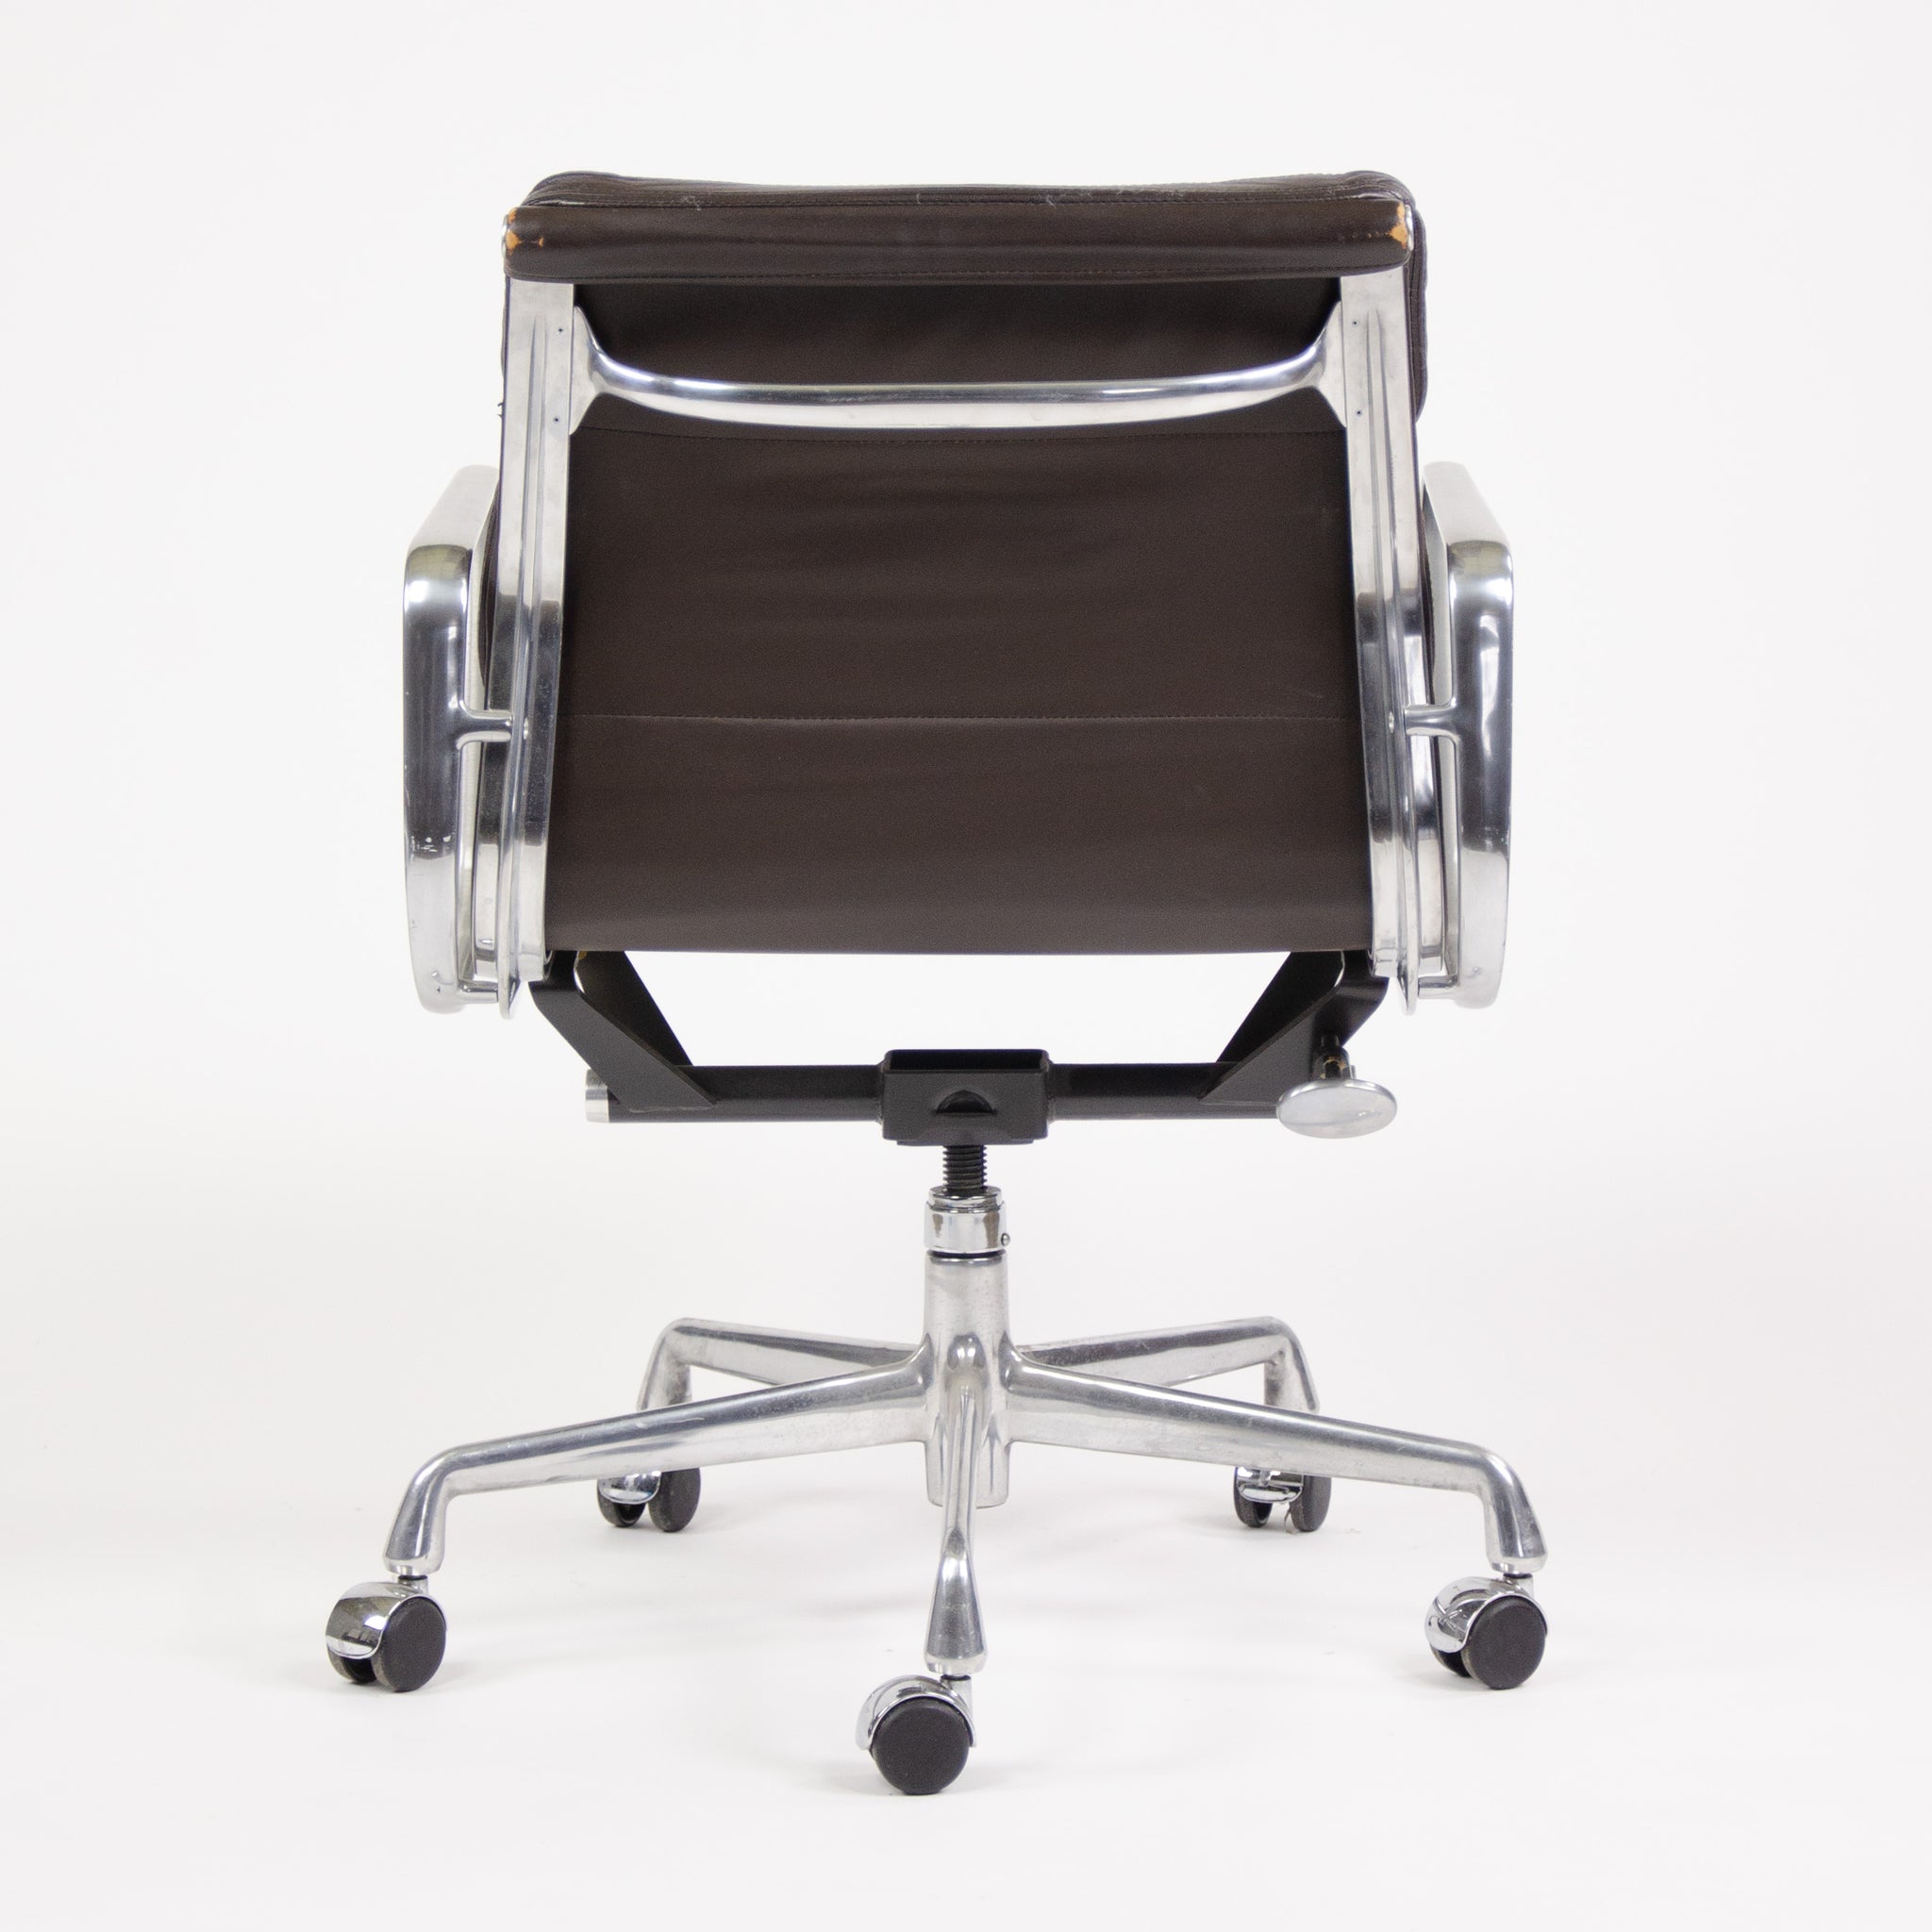 SOLD Herman Miller Eames Soft Pad Aluminum Group Chair Brown Leather 2000's